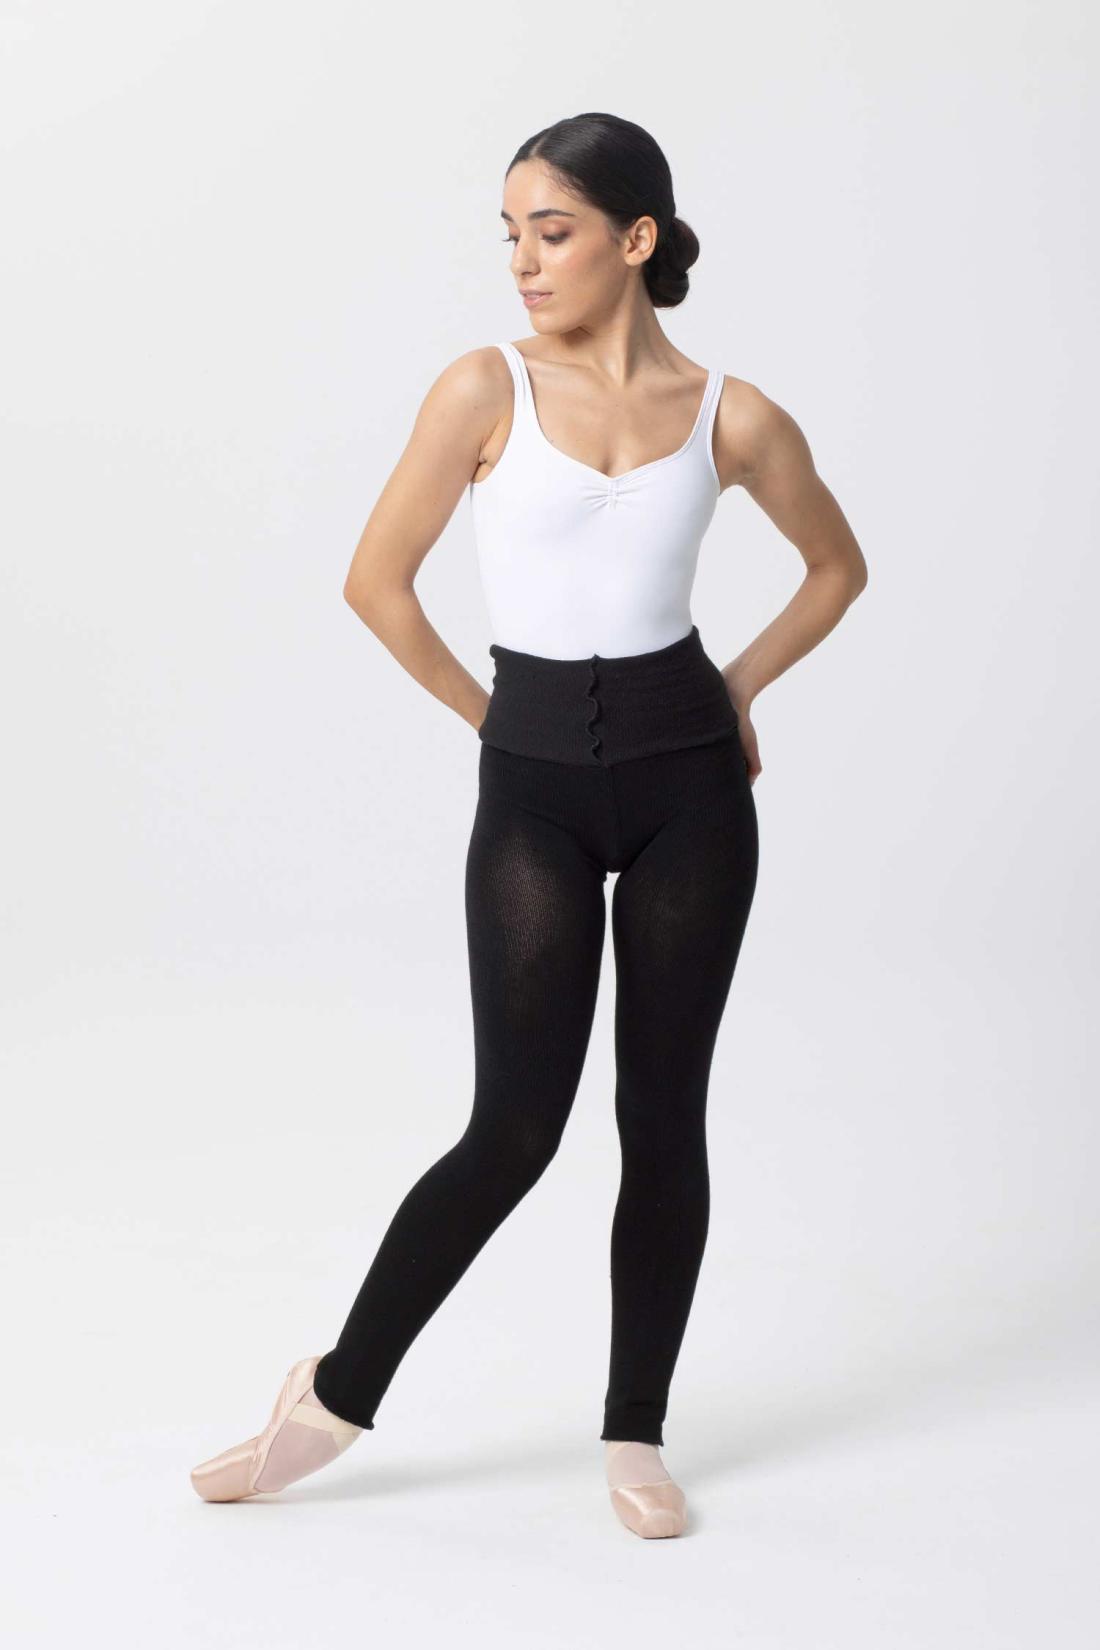 Warm up Knitted Cotton Pants Dance Ballet Jazz